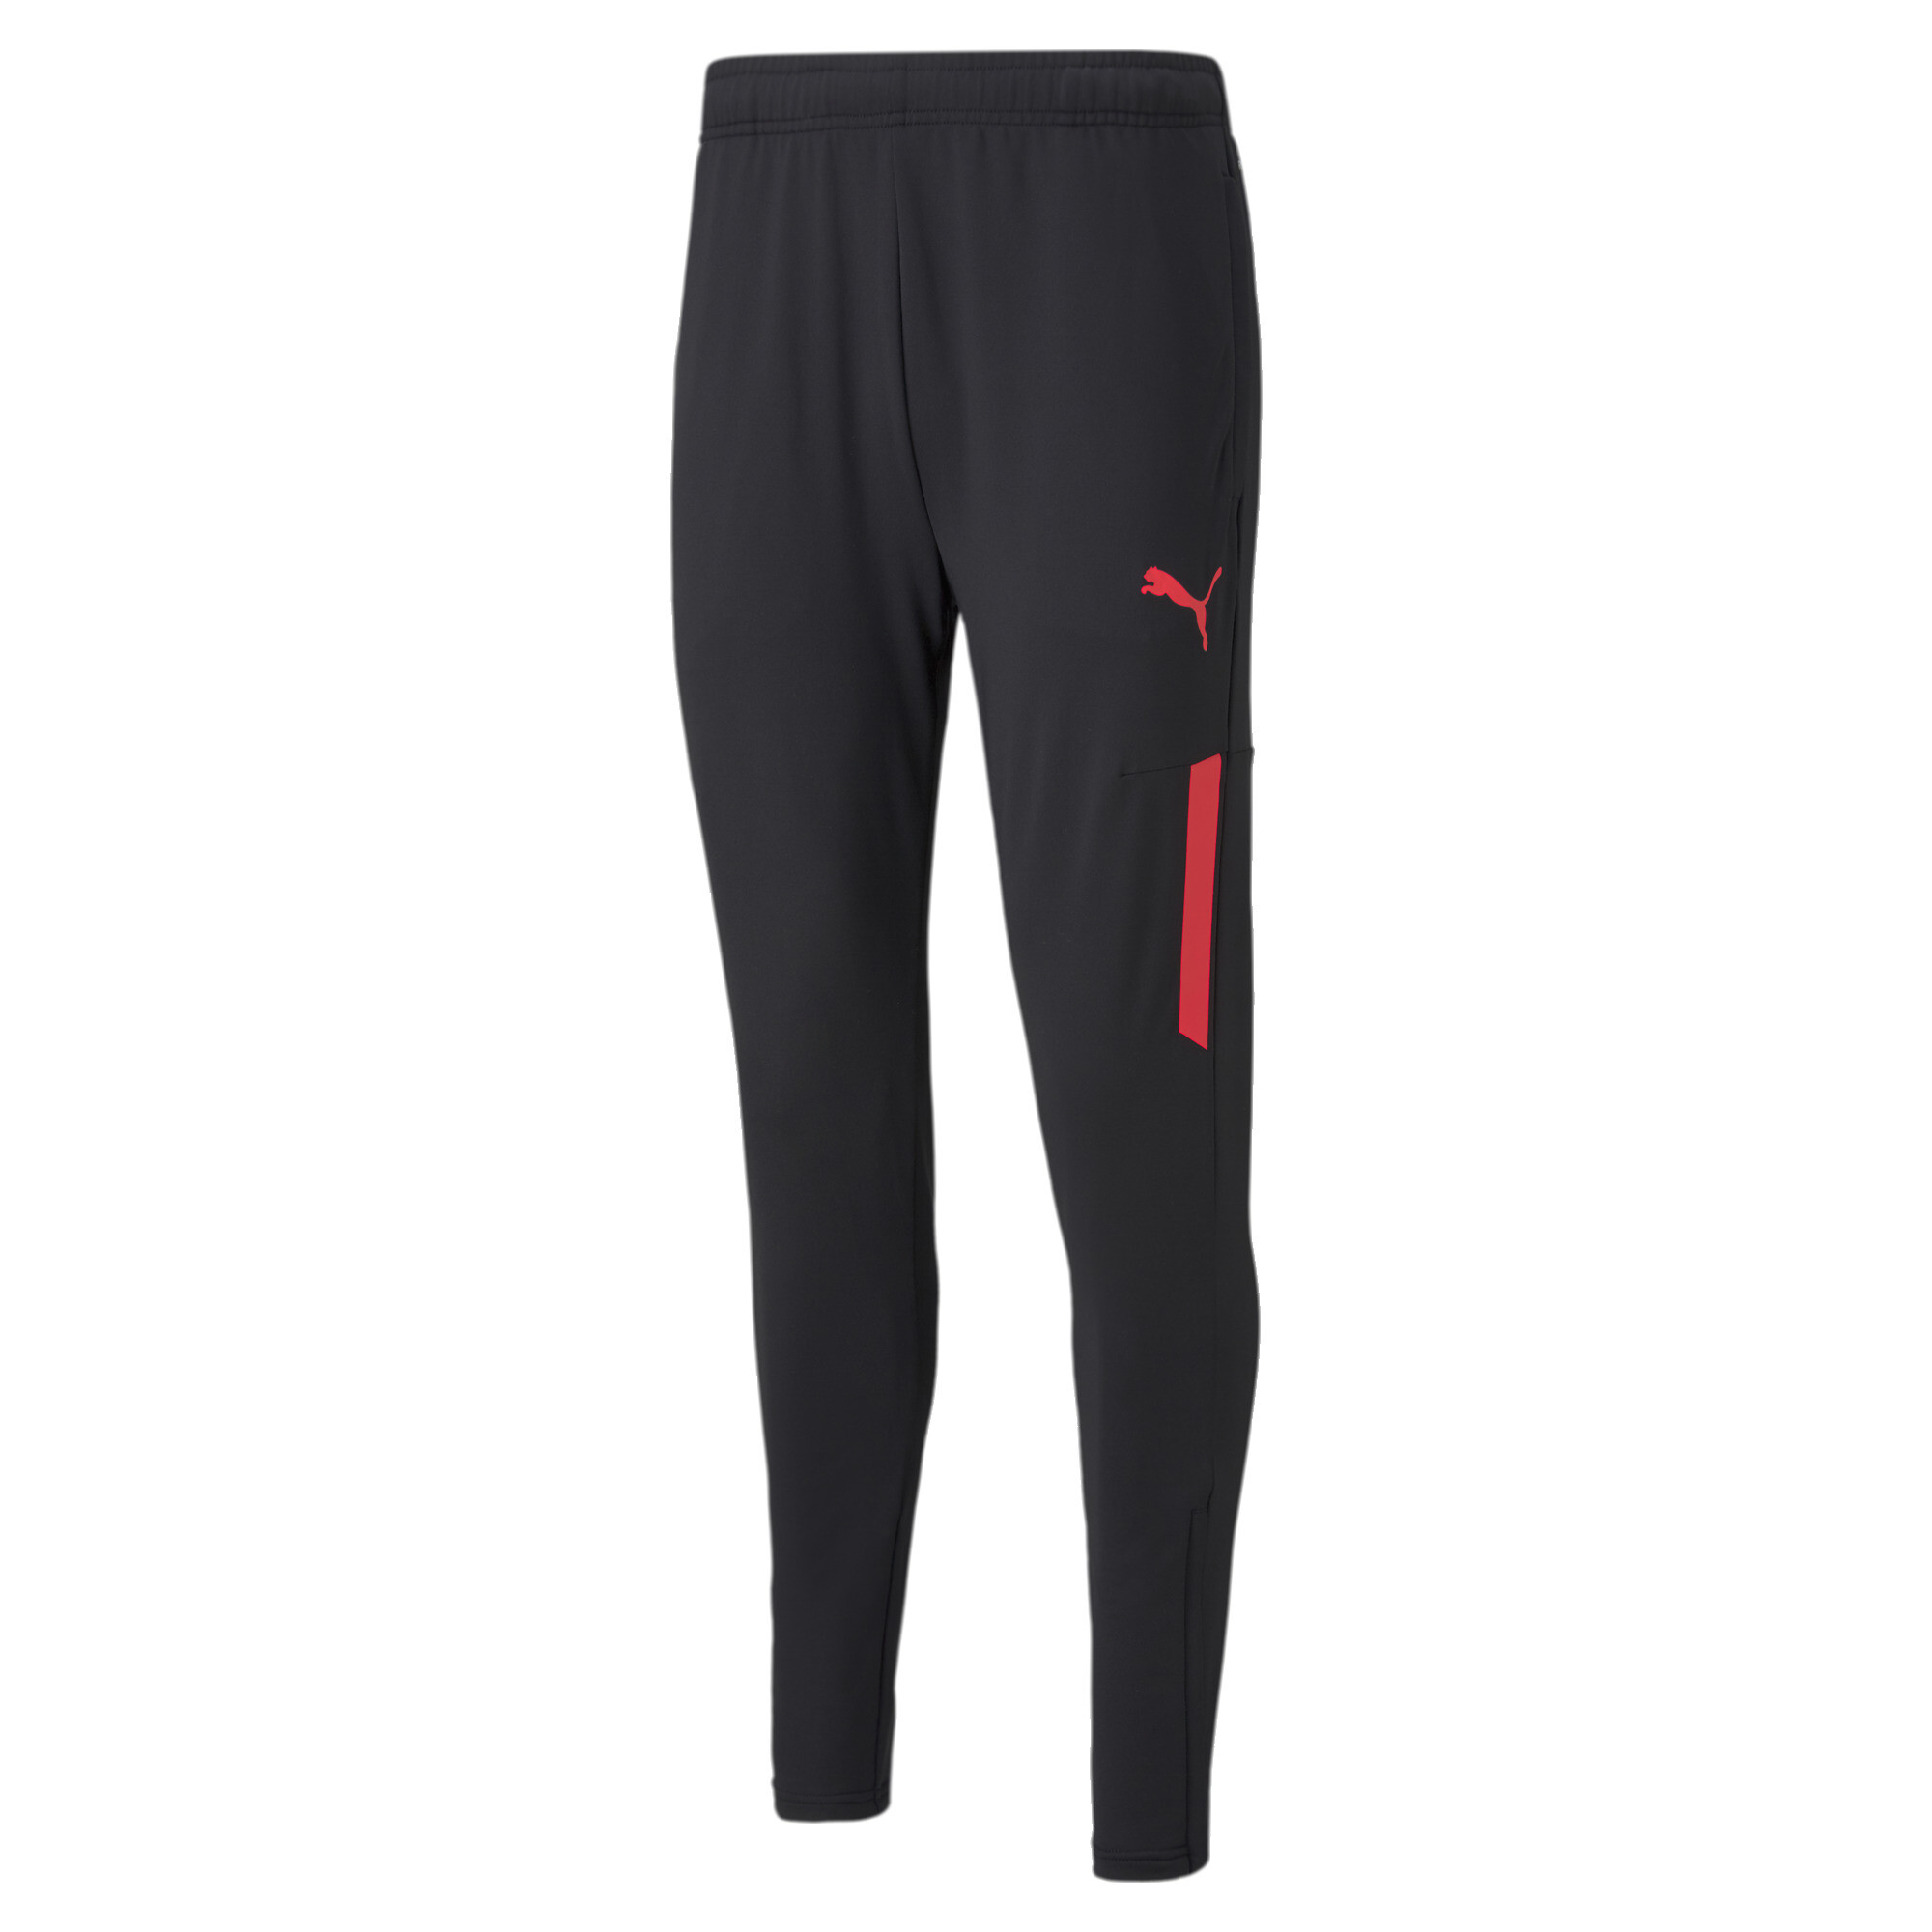 PUMA IndividualCUP Football Training Pants Sports Bottoms Trousers Mens ...